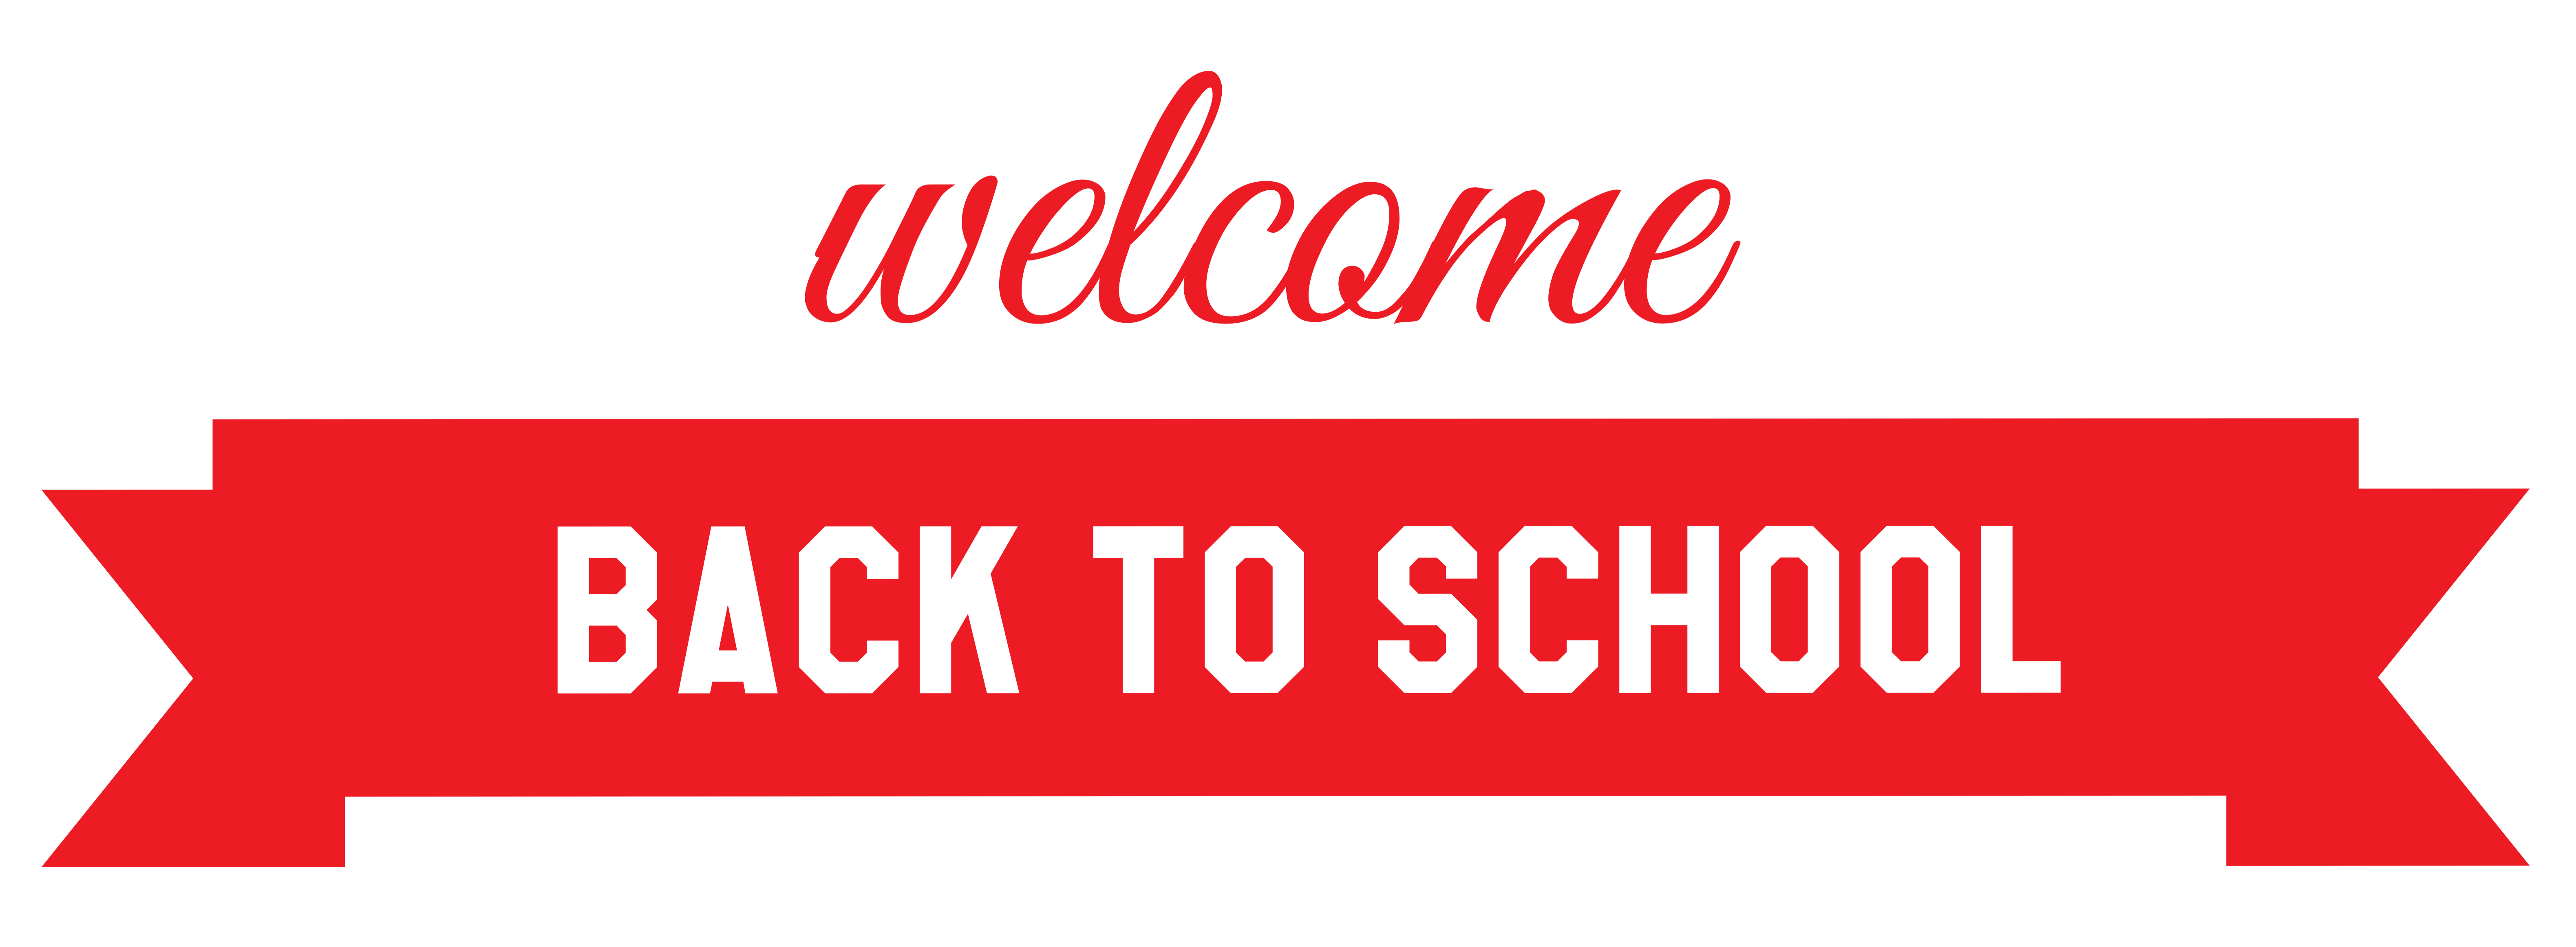 back to school banner clip art - photo #8